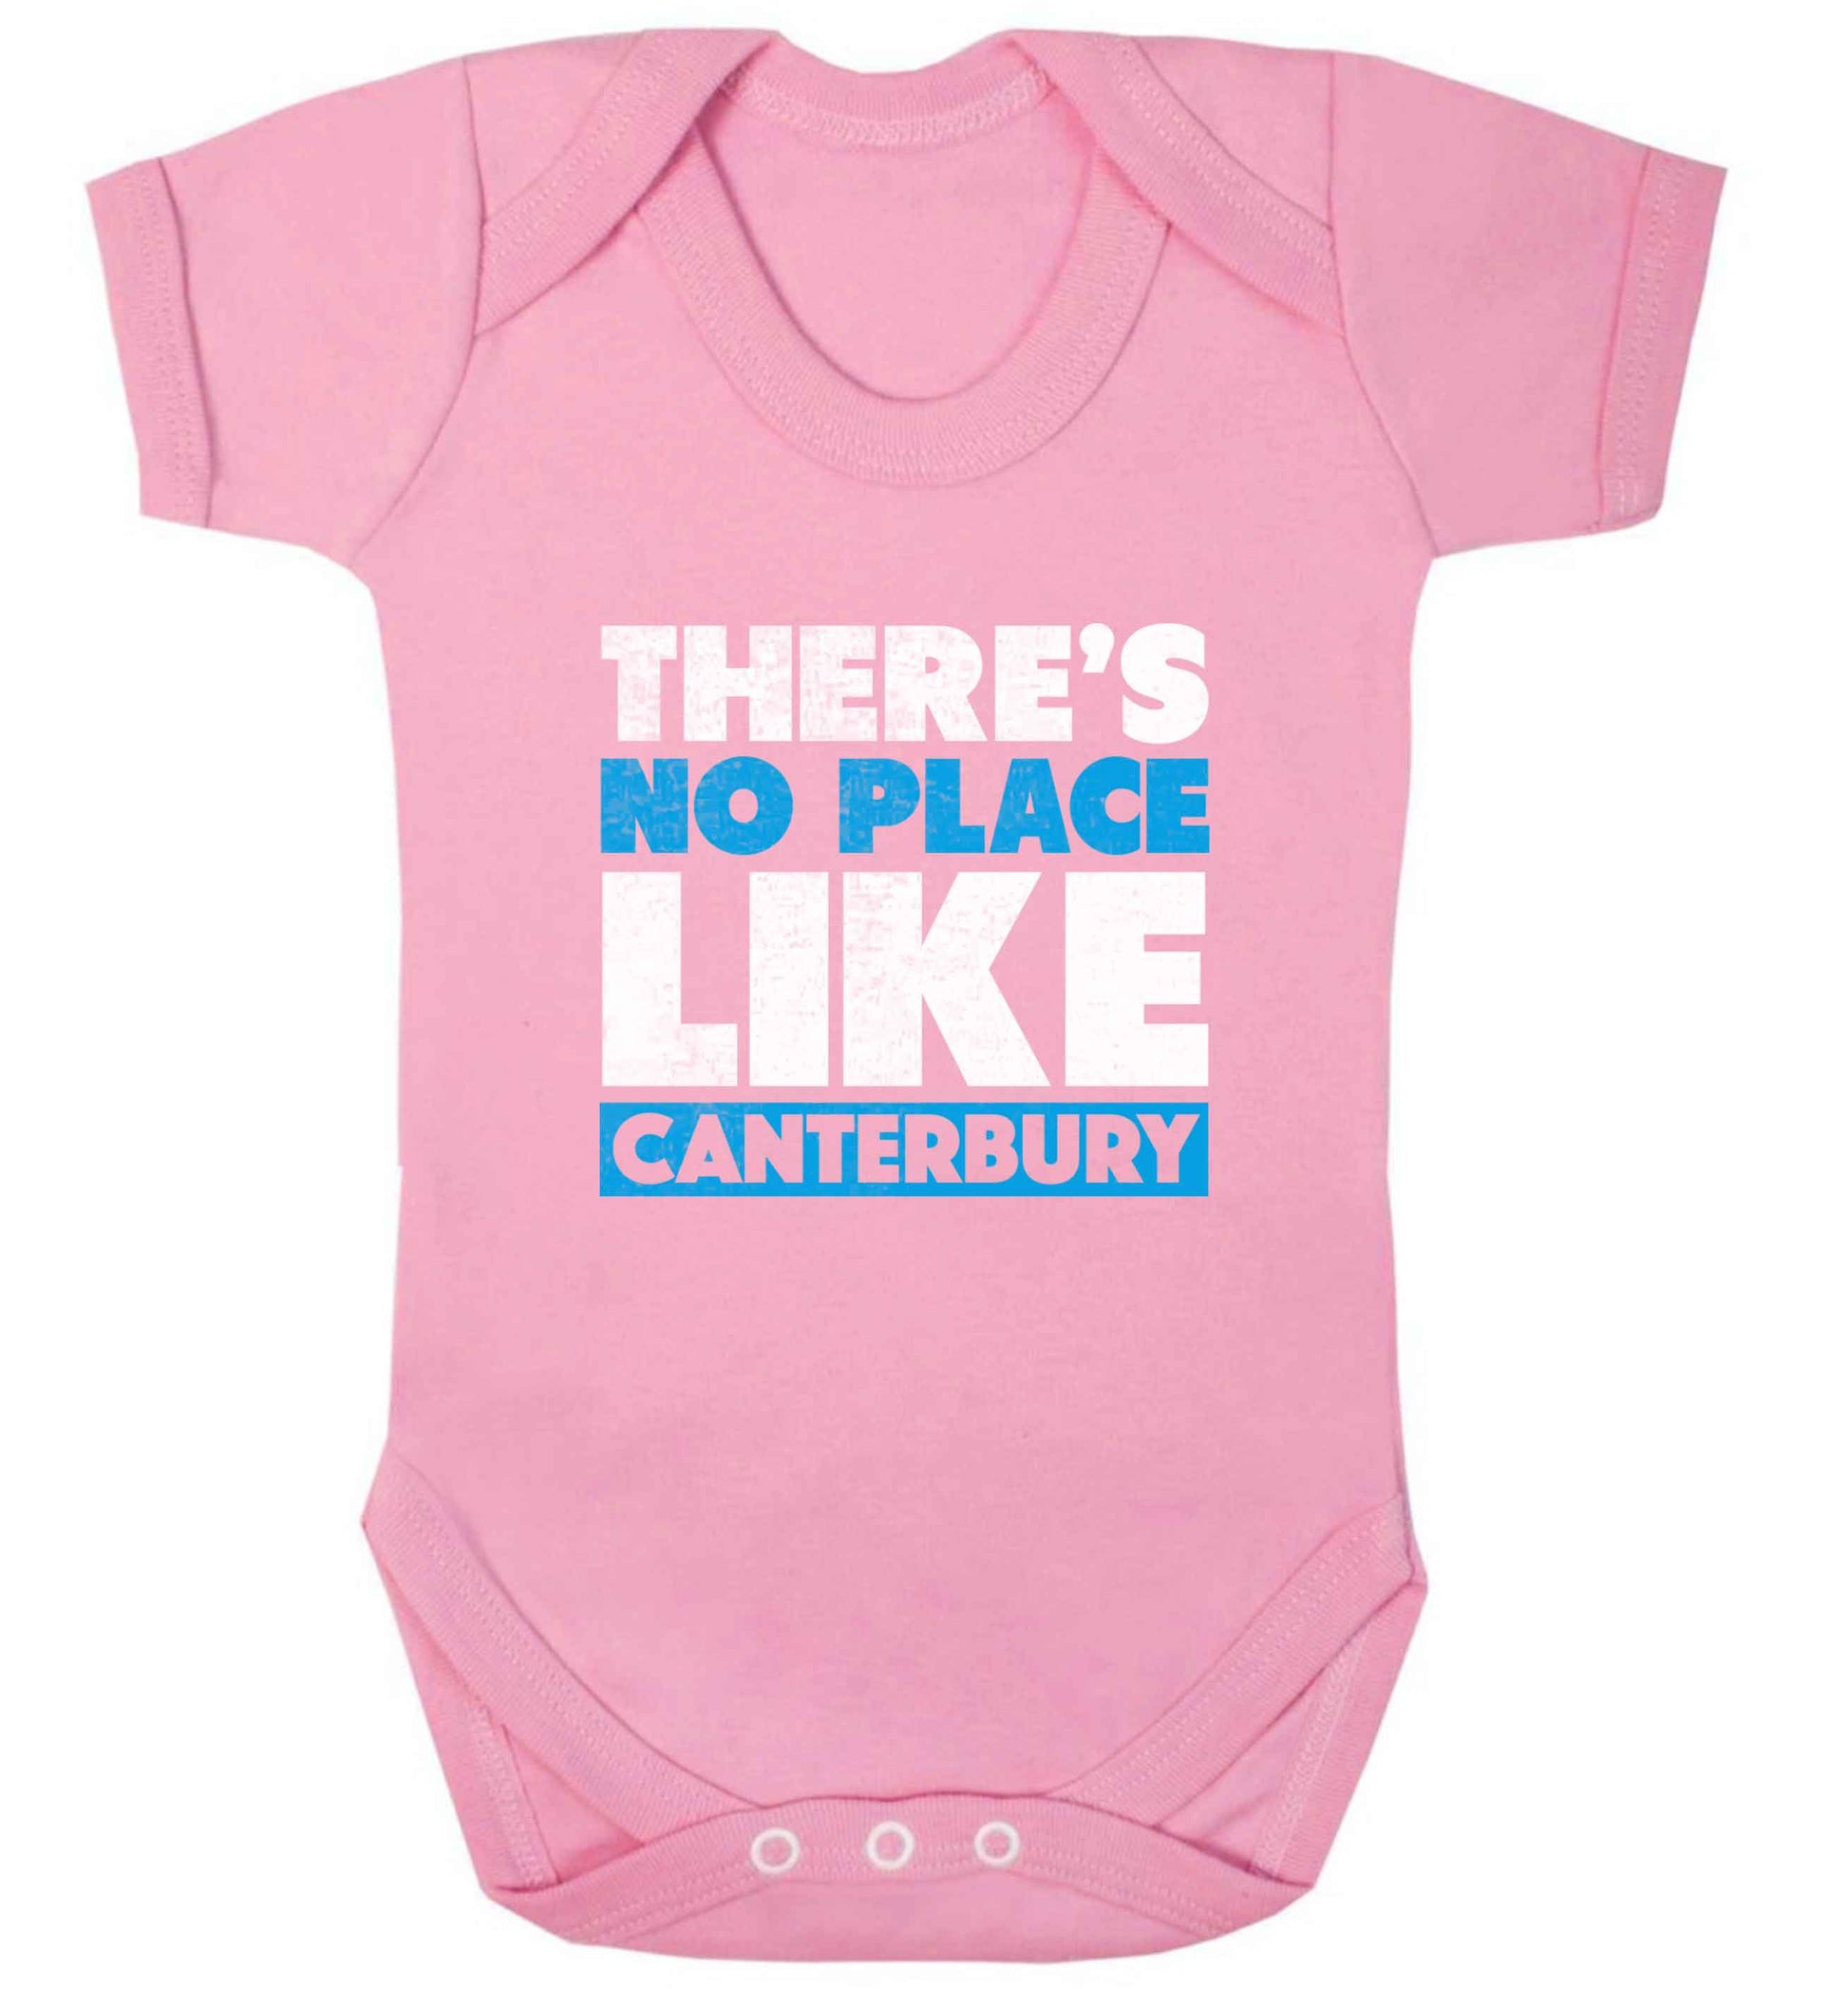 There's no place like Canterbury baby vest pale pink 18-24 months